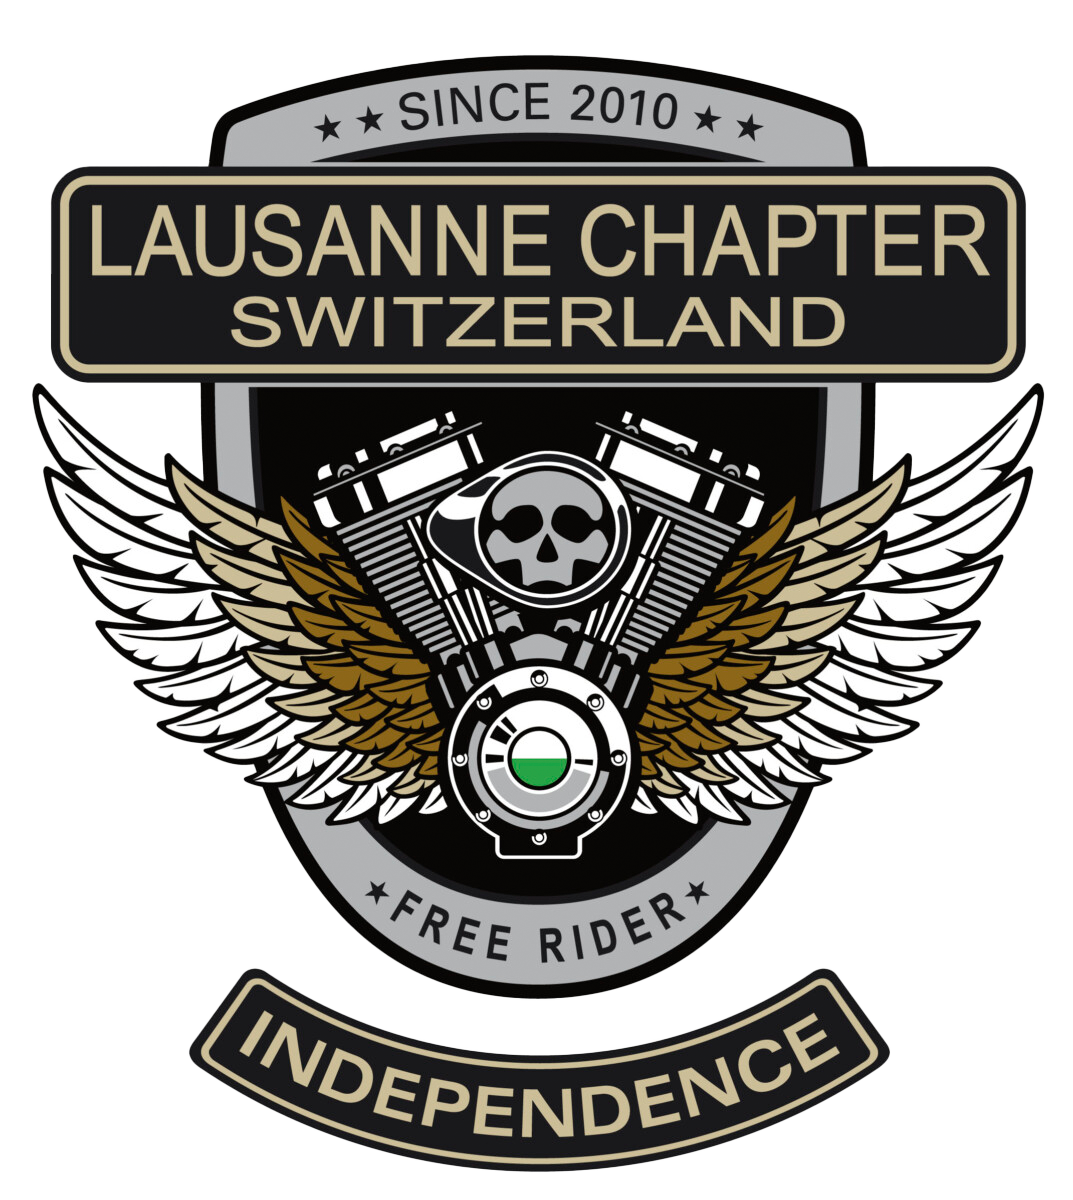 Lausanne Chapter